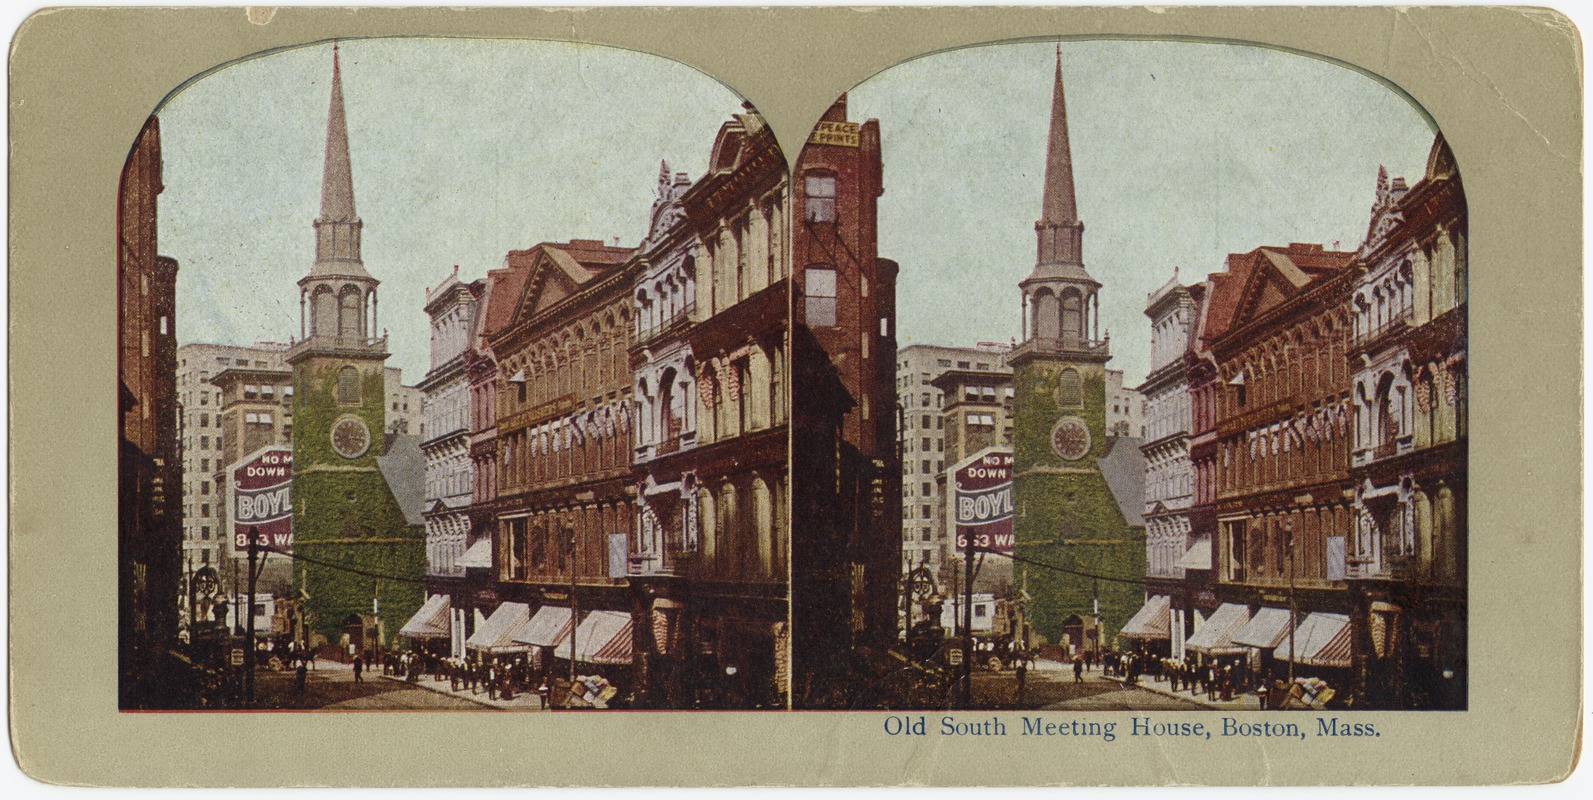 Old South Meeting House, Boston, Mass.